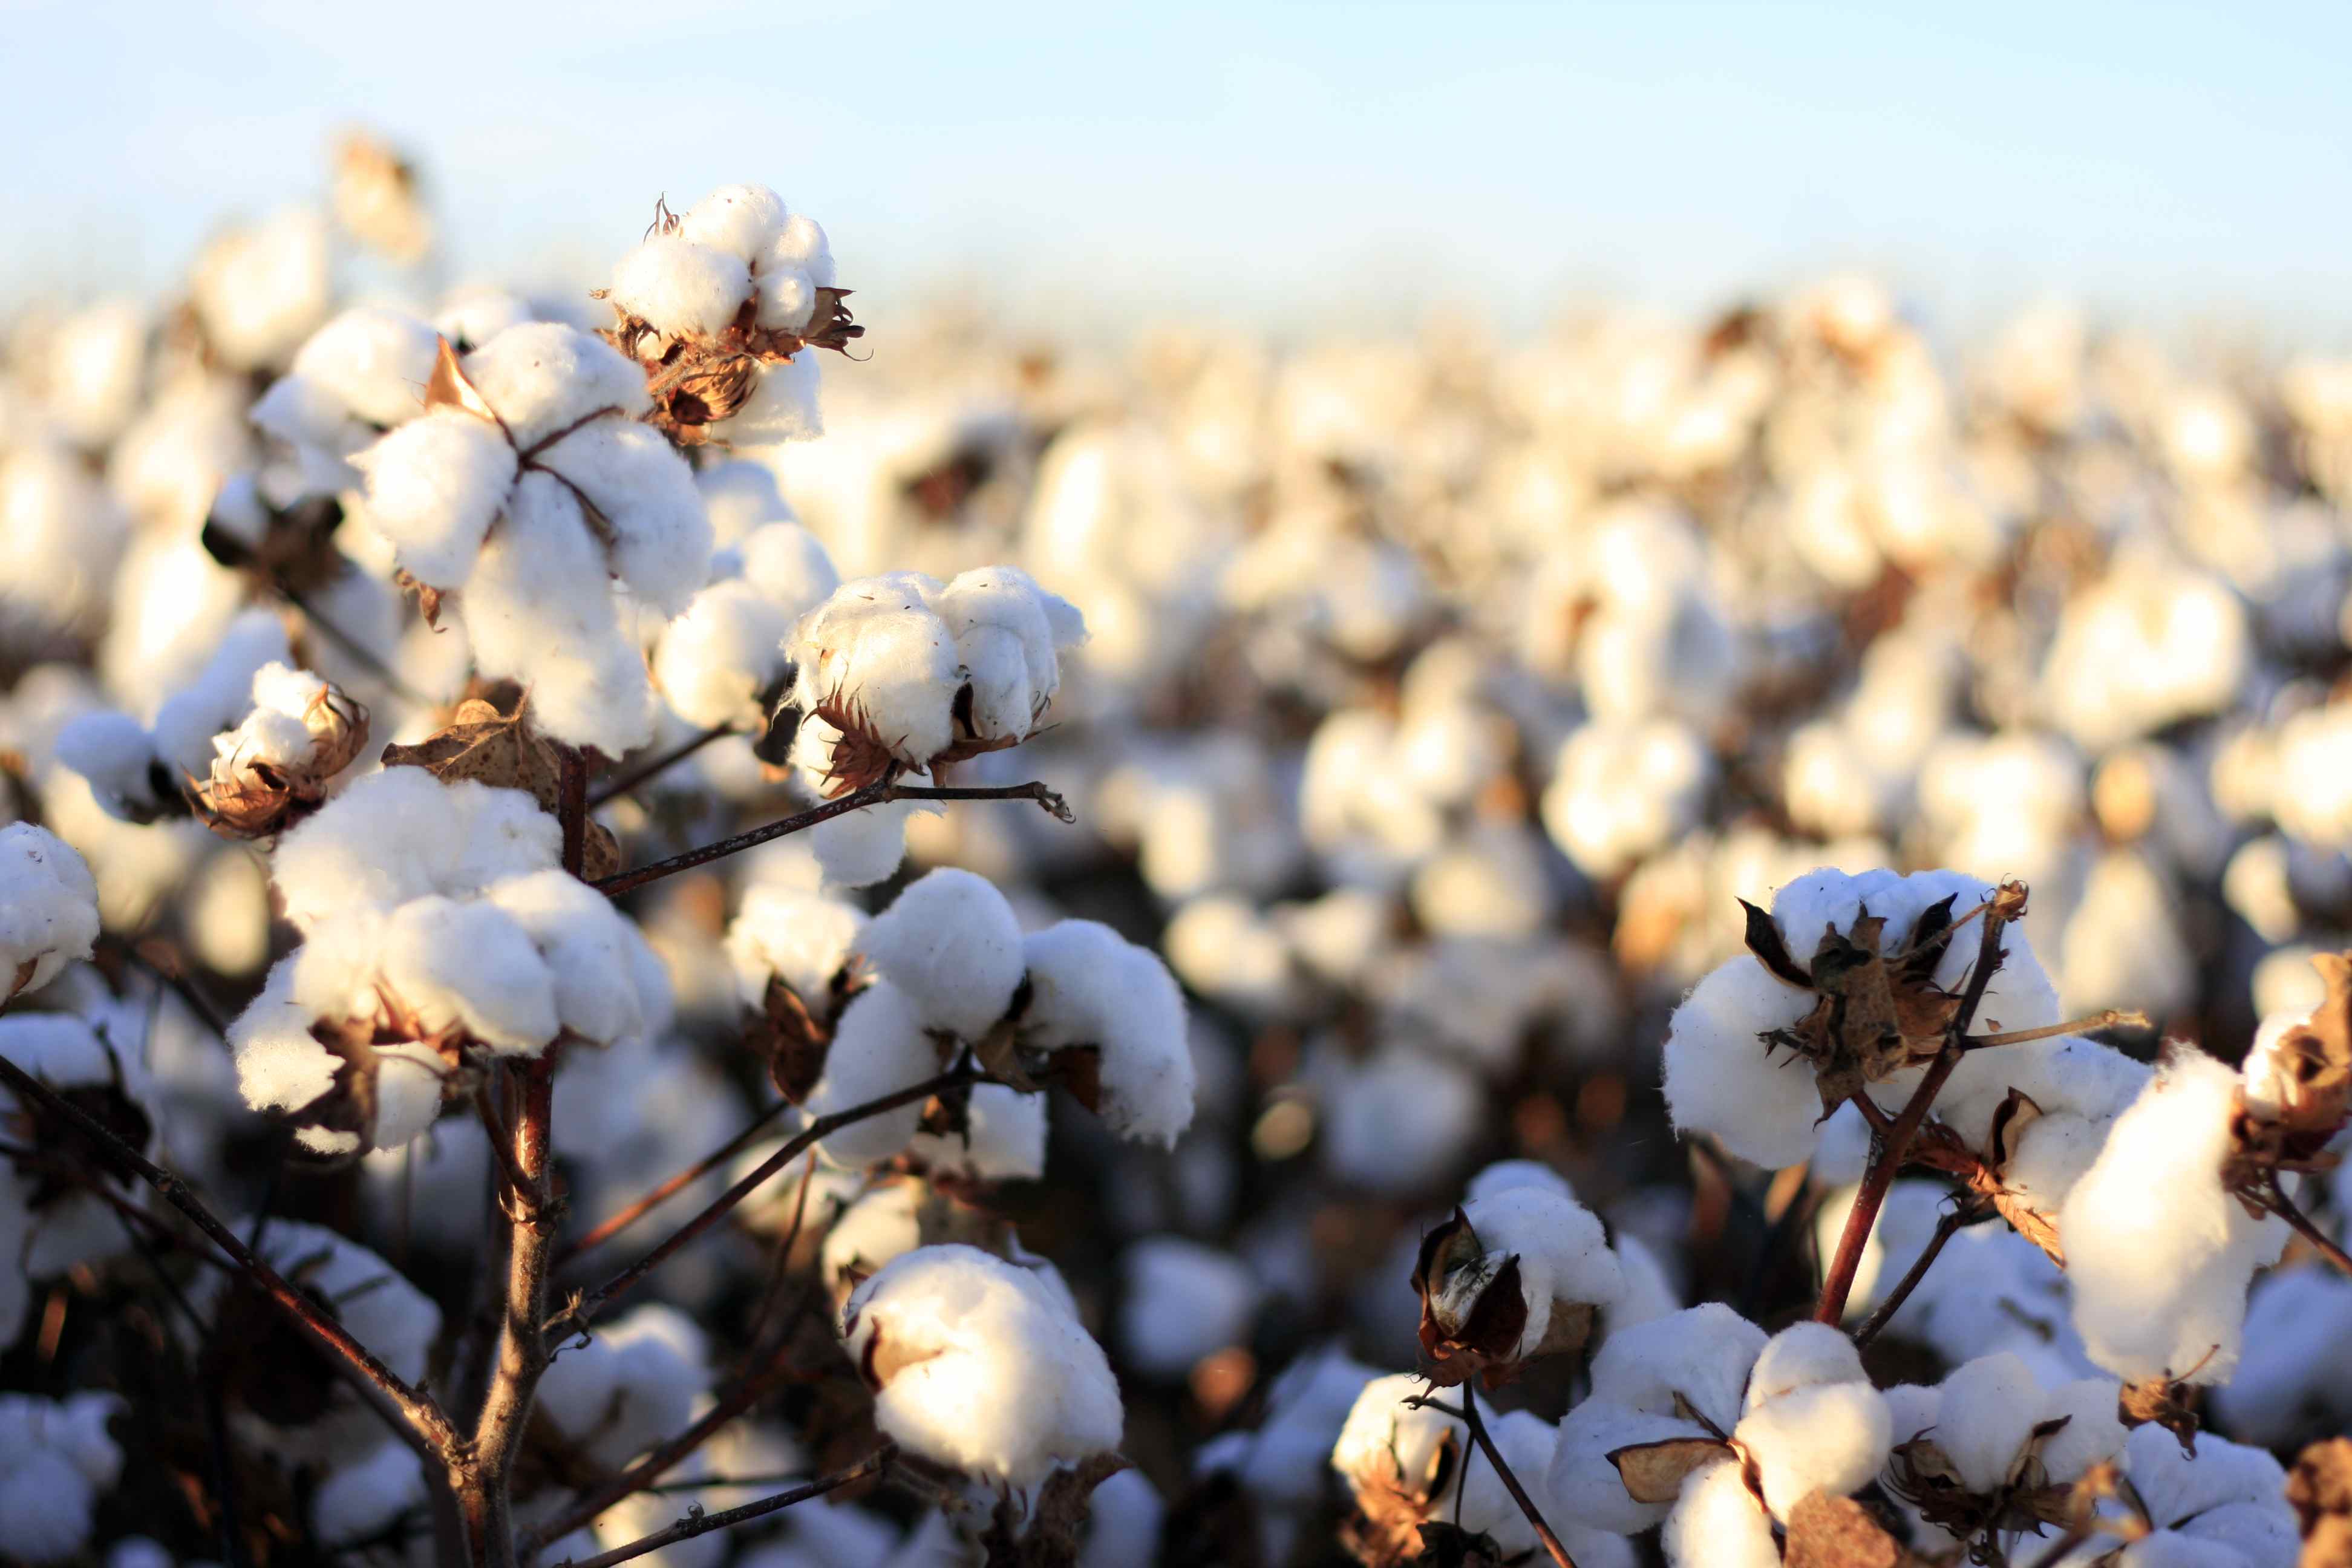 Falling cotton price attracts buying - PKKH.tv